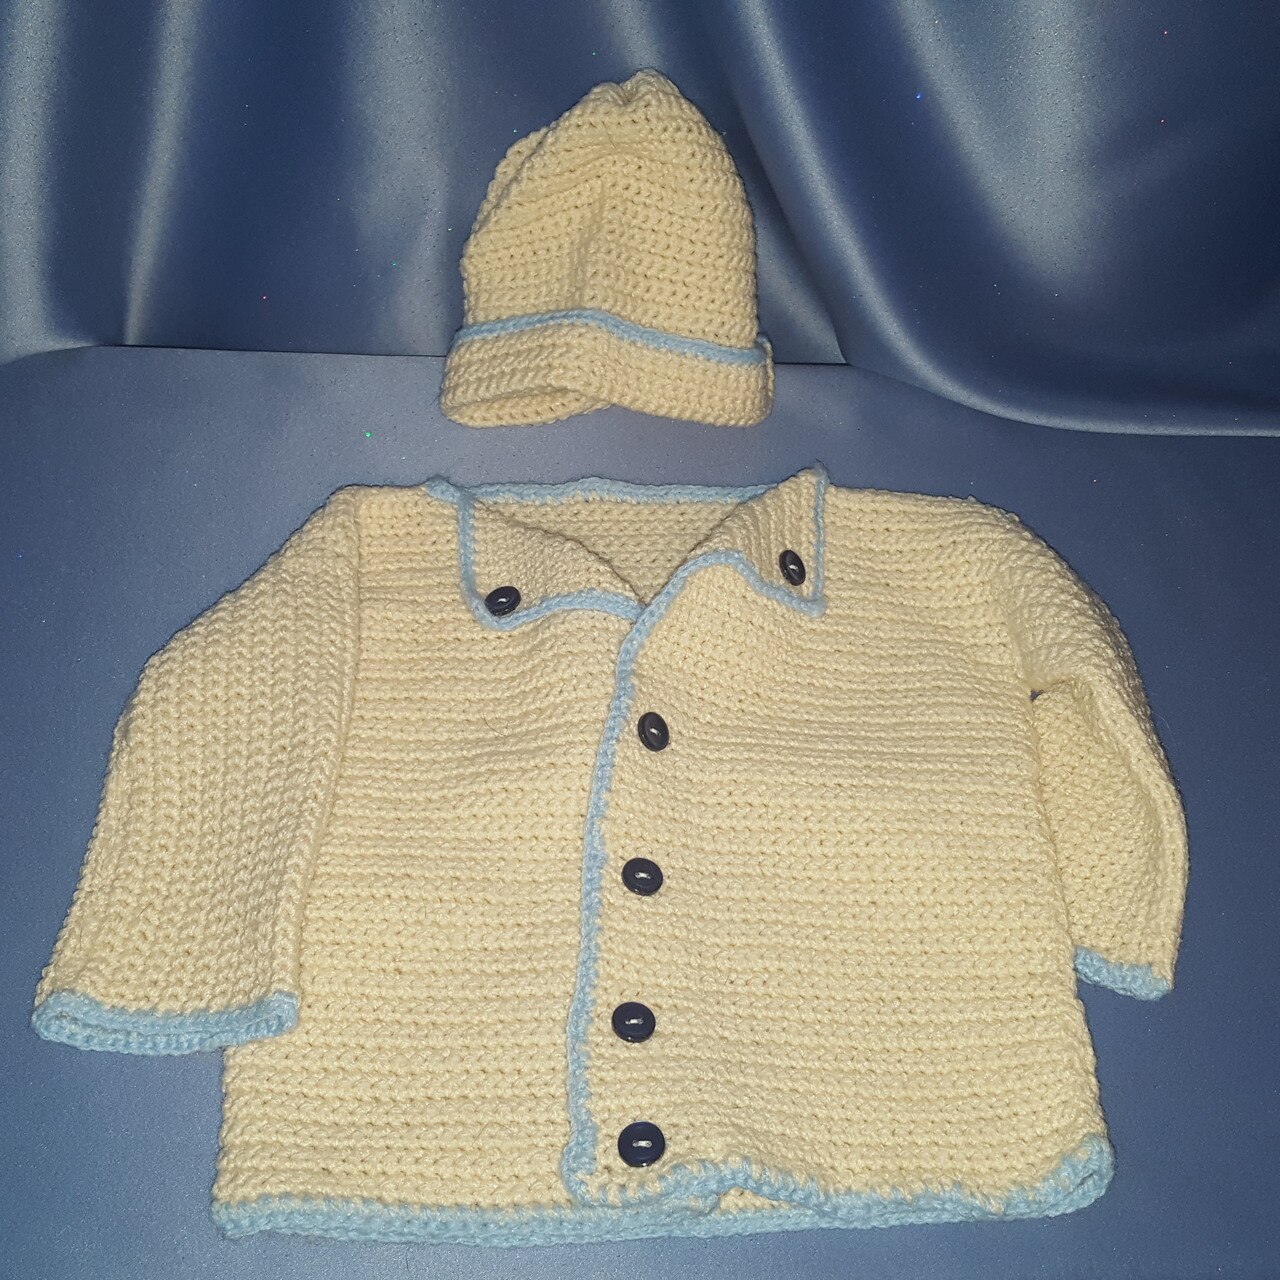 Primary image for Baby Sweater in Ecru with Blue Trim and Buttons by Mumsie of Stratford